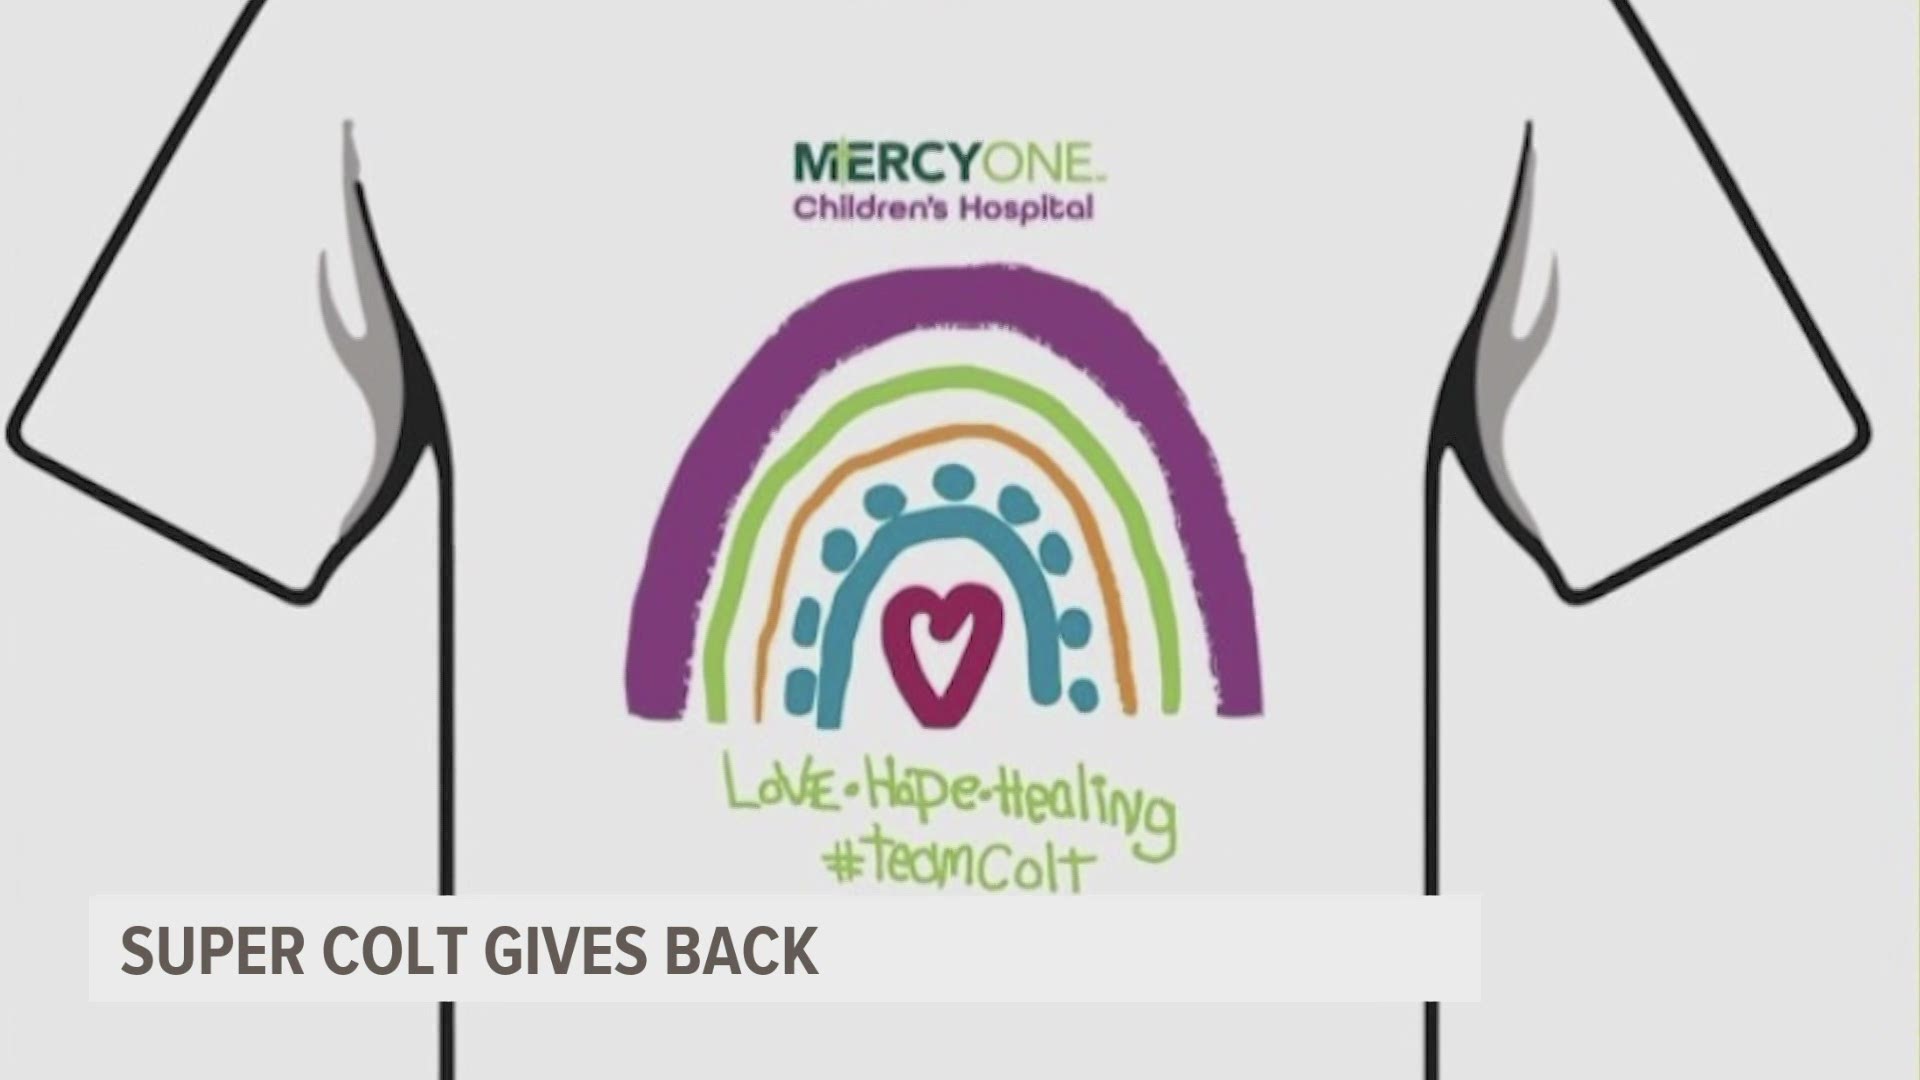 You can join 'Super Colt' in his mission to give back to Mercy Hospital.